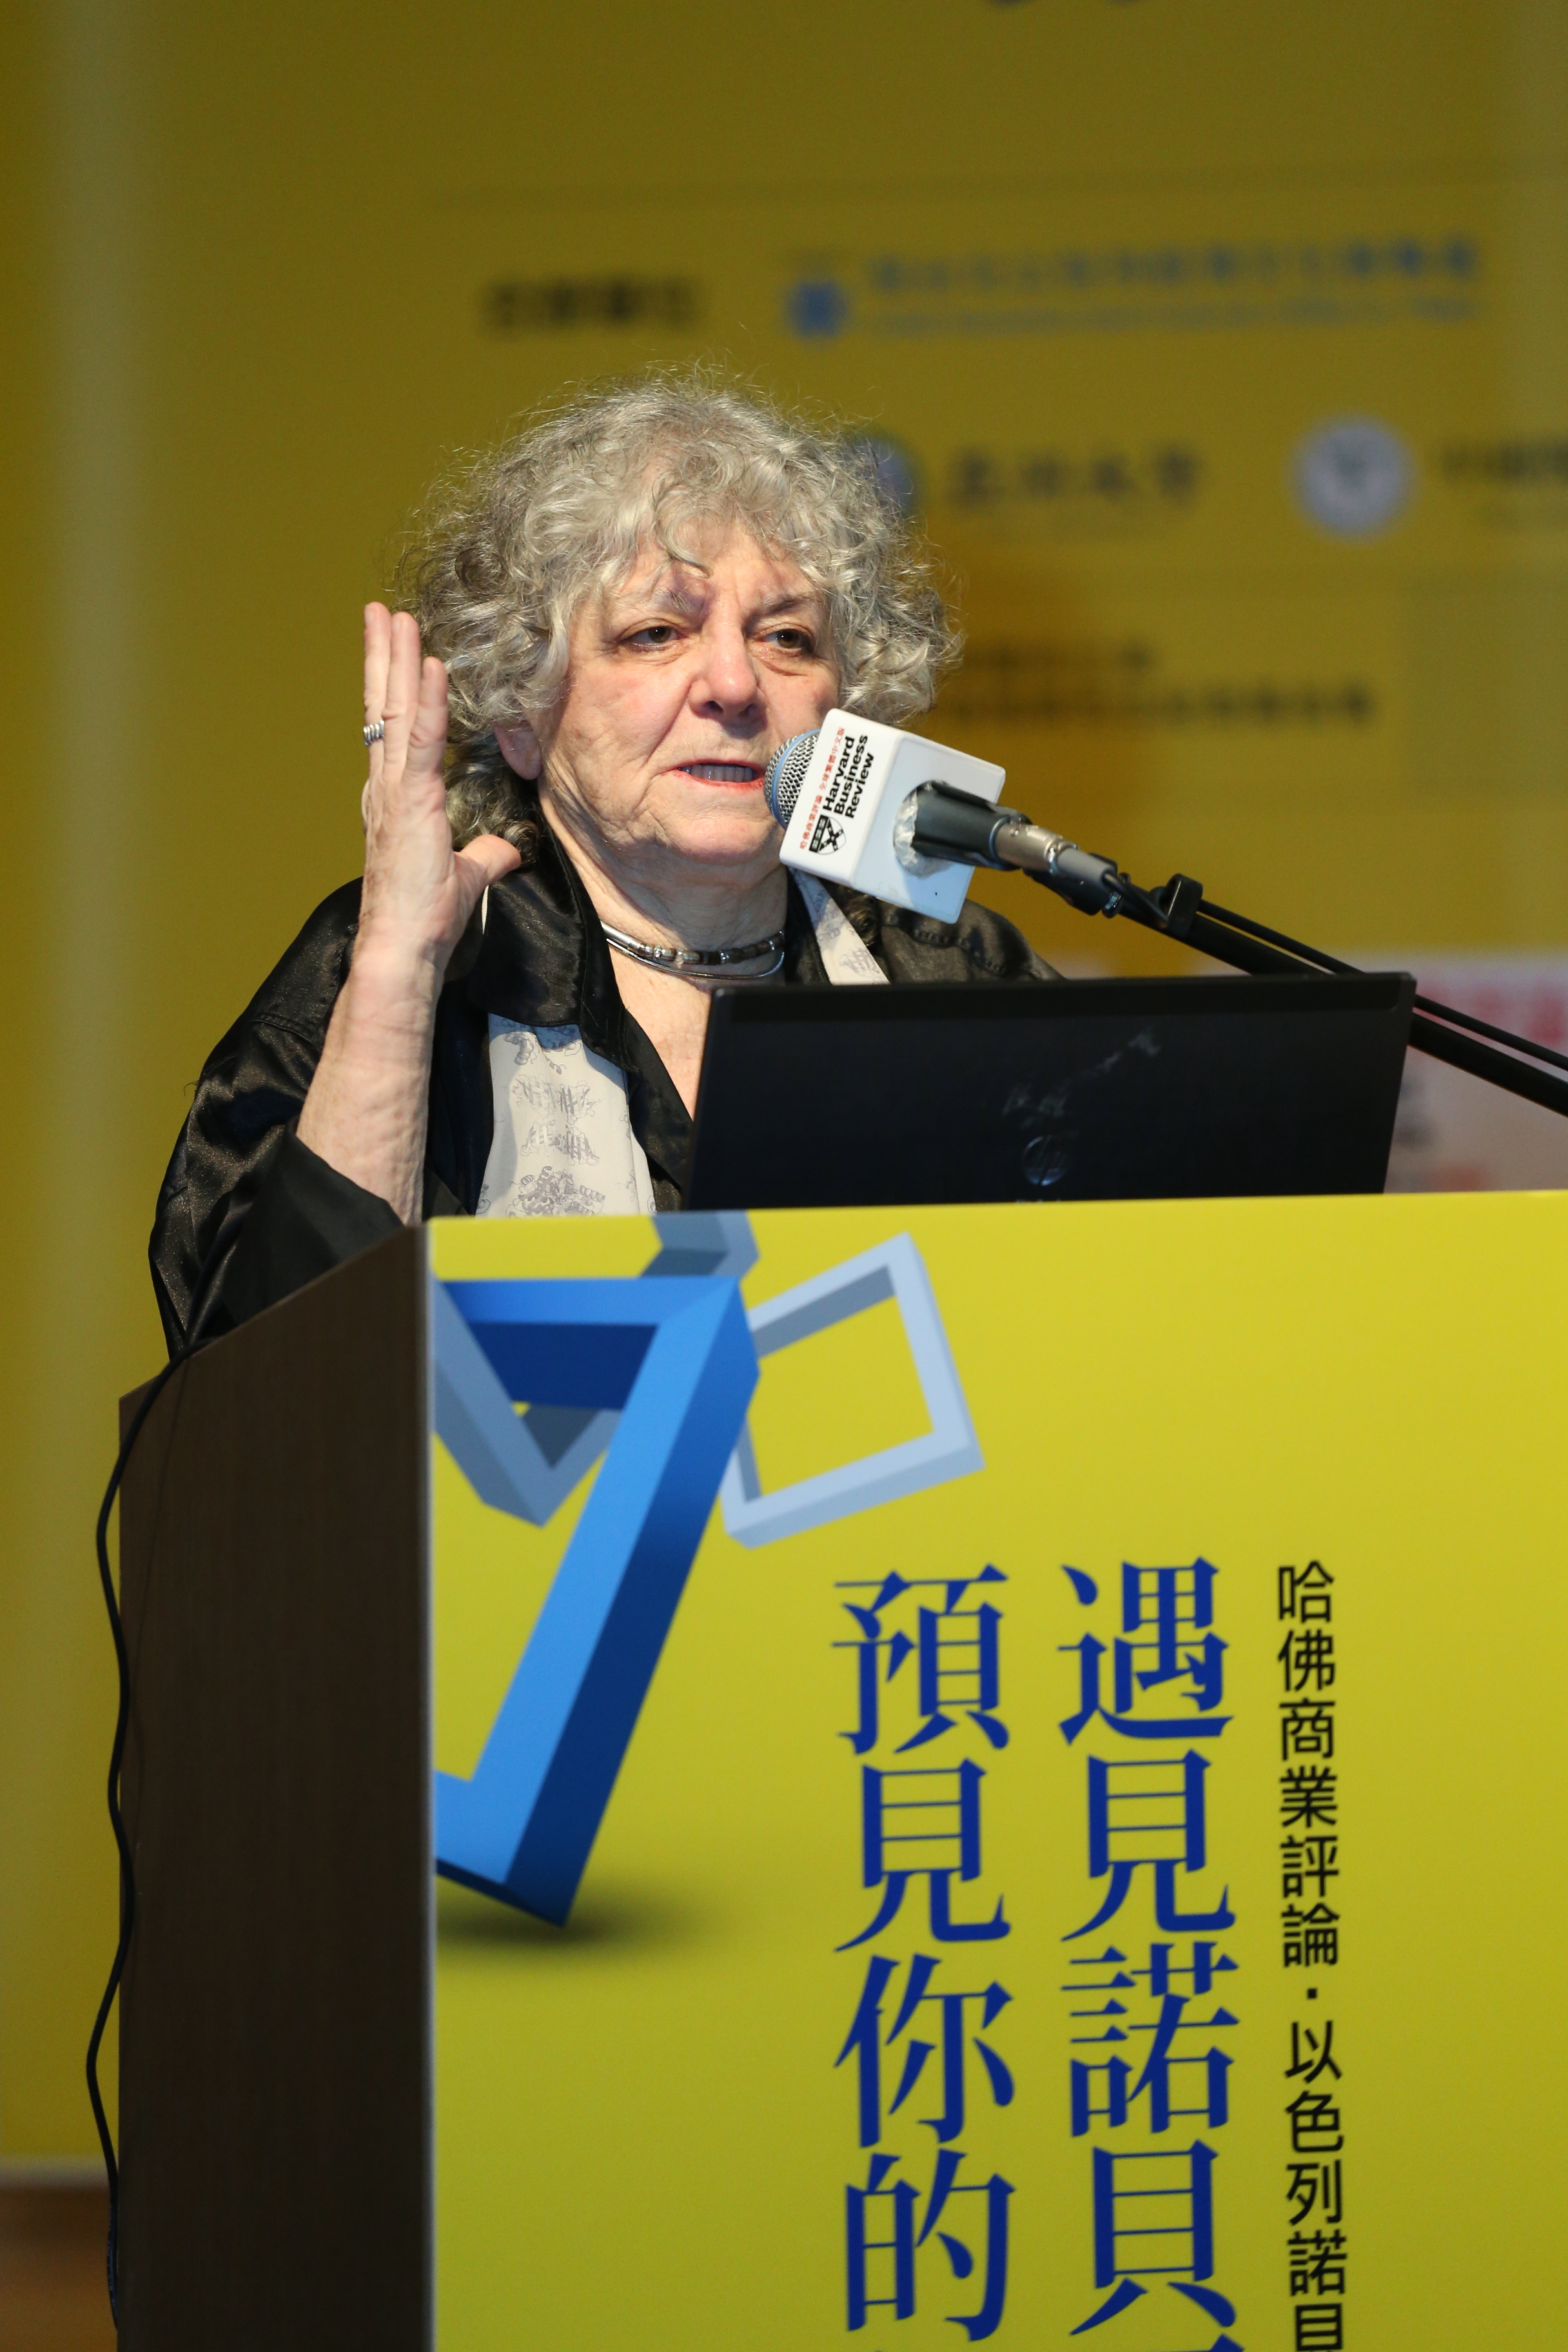 2009 Nobel Prize in chemistry, Dr. Ada Yonath gave a speech at AU.